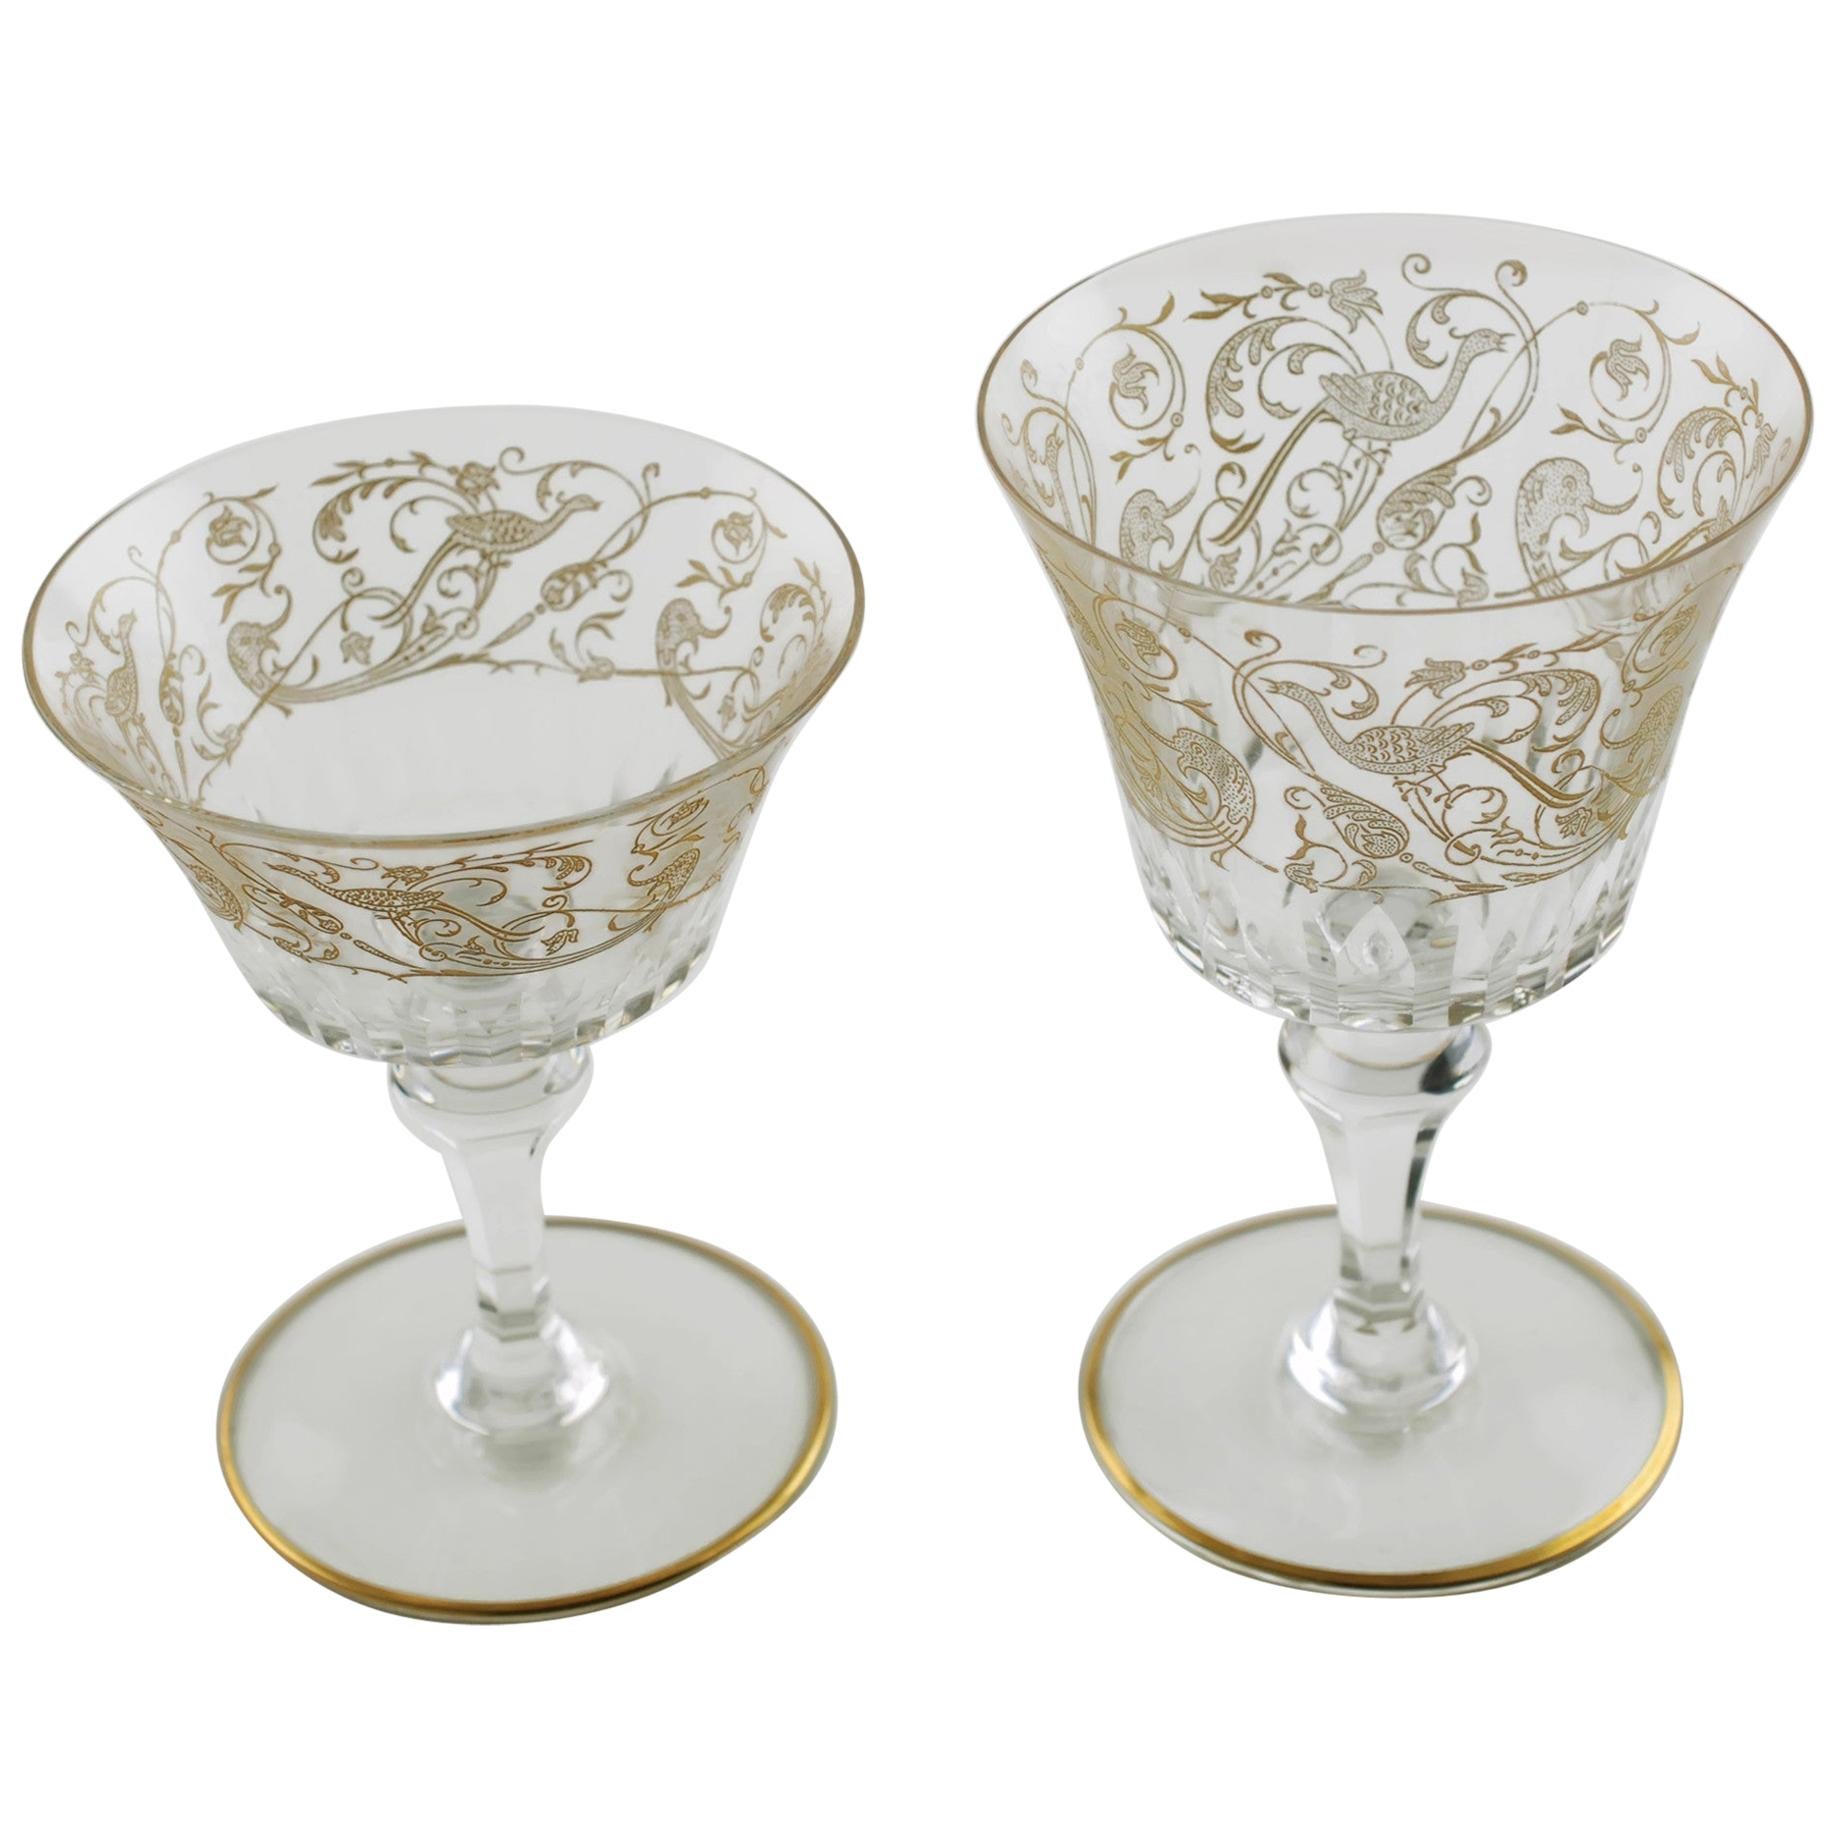 This set of 16 Baccarat French crystal glasses have been decorated in the lovely Bergame pattern. Baccarat's ornate Bergame is a variation of the Parme pattern which dates to 1850. Bergame features an Empire Revival motif consisting of etched Birds